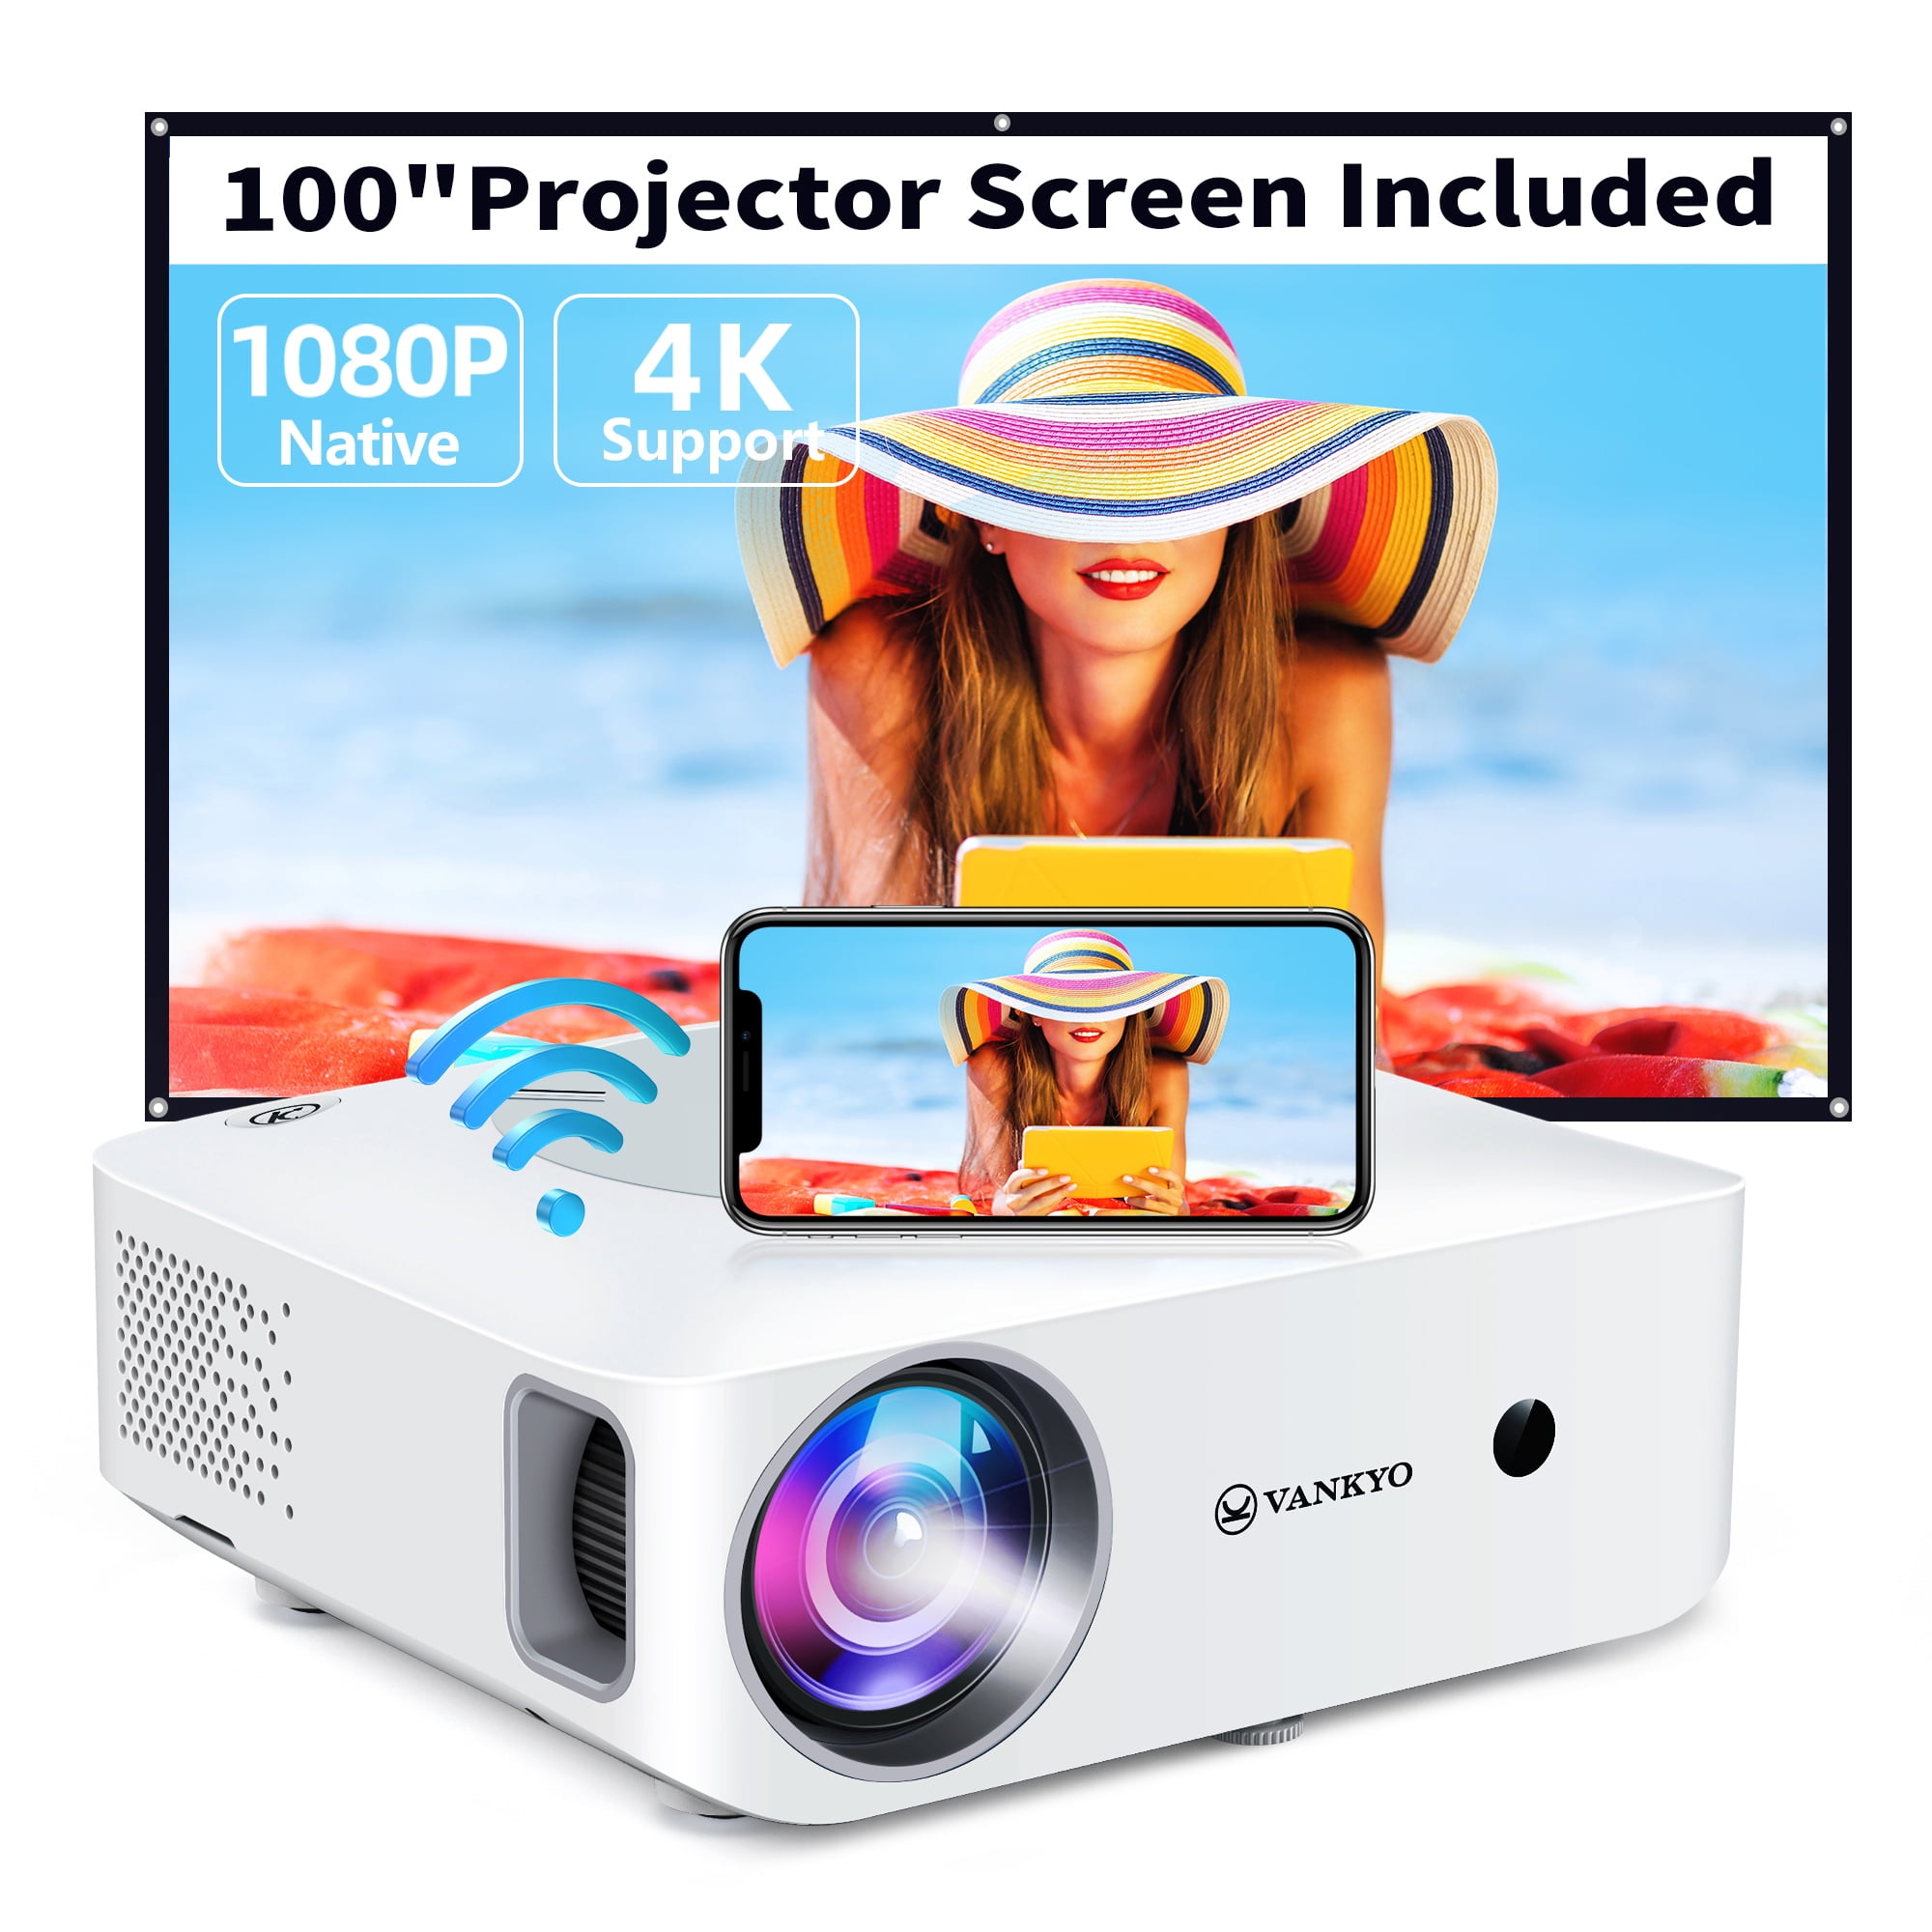 VANKYO Leisure E30T Native 1080P 5G WiFi Projector, Supports 4K 5G Sync, Full HD LED Projector $31